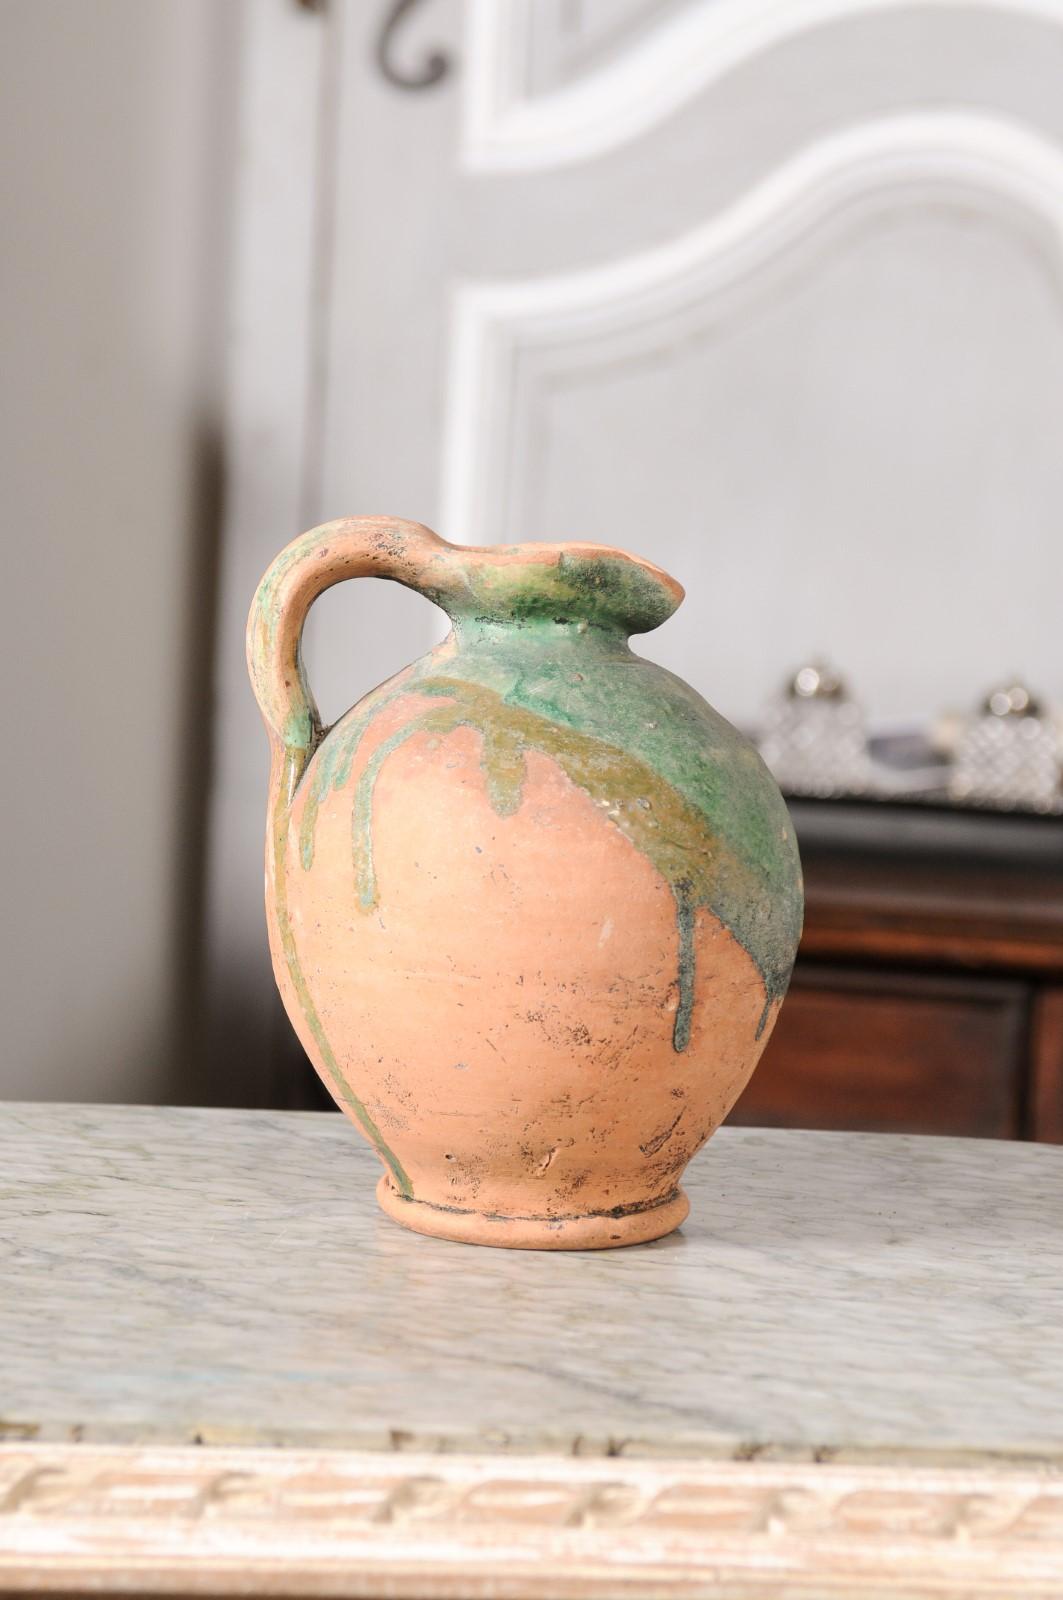 Rustic French Provincial 19th Century Pottery Jug with Green Glazed Accents For Sale 2